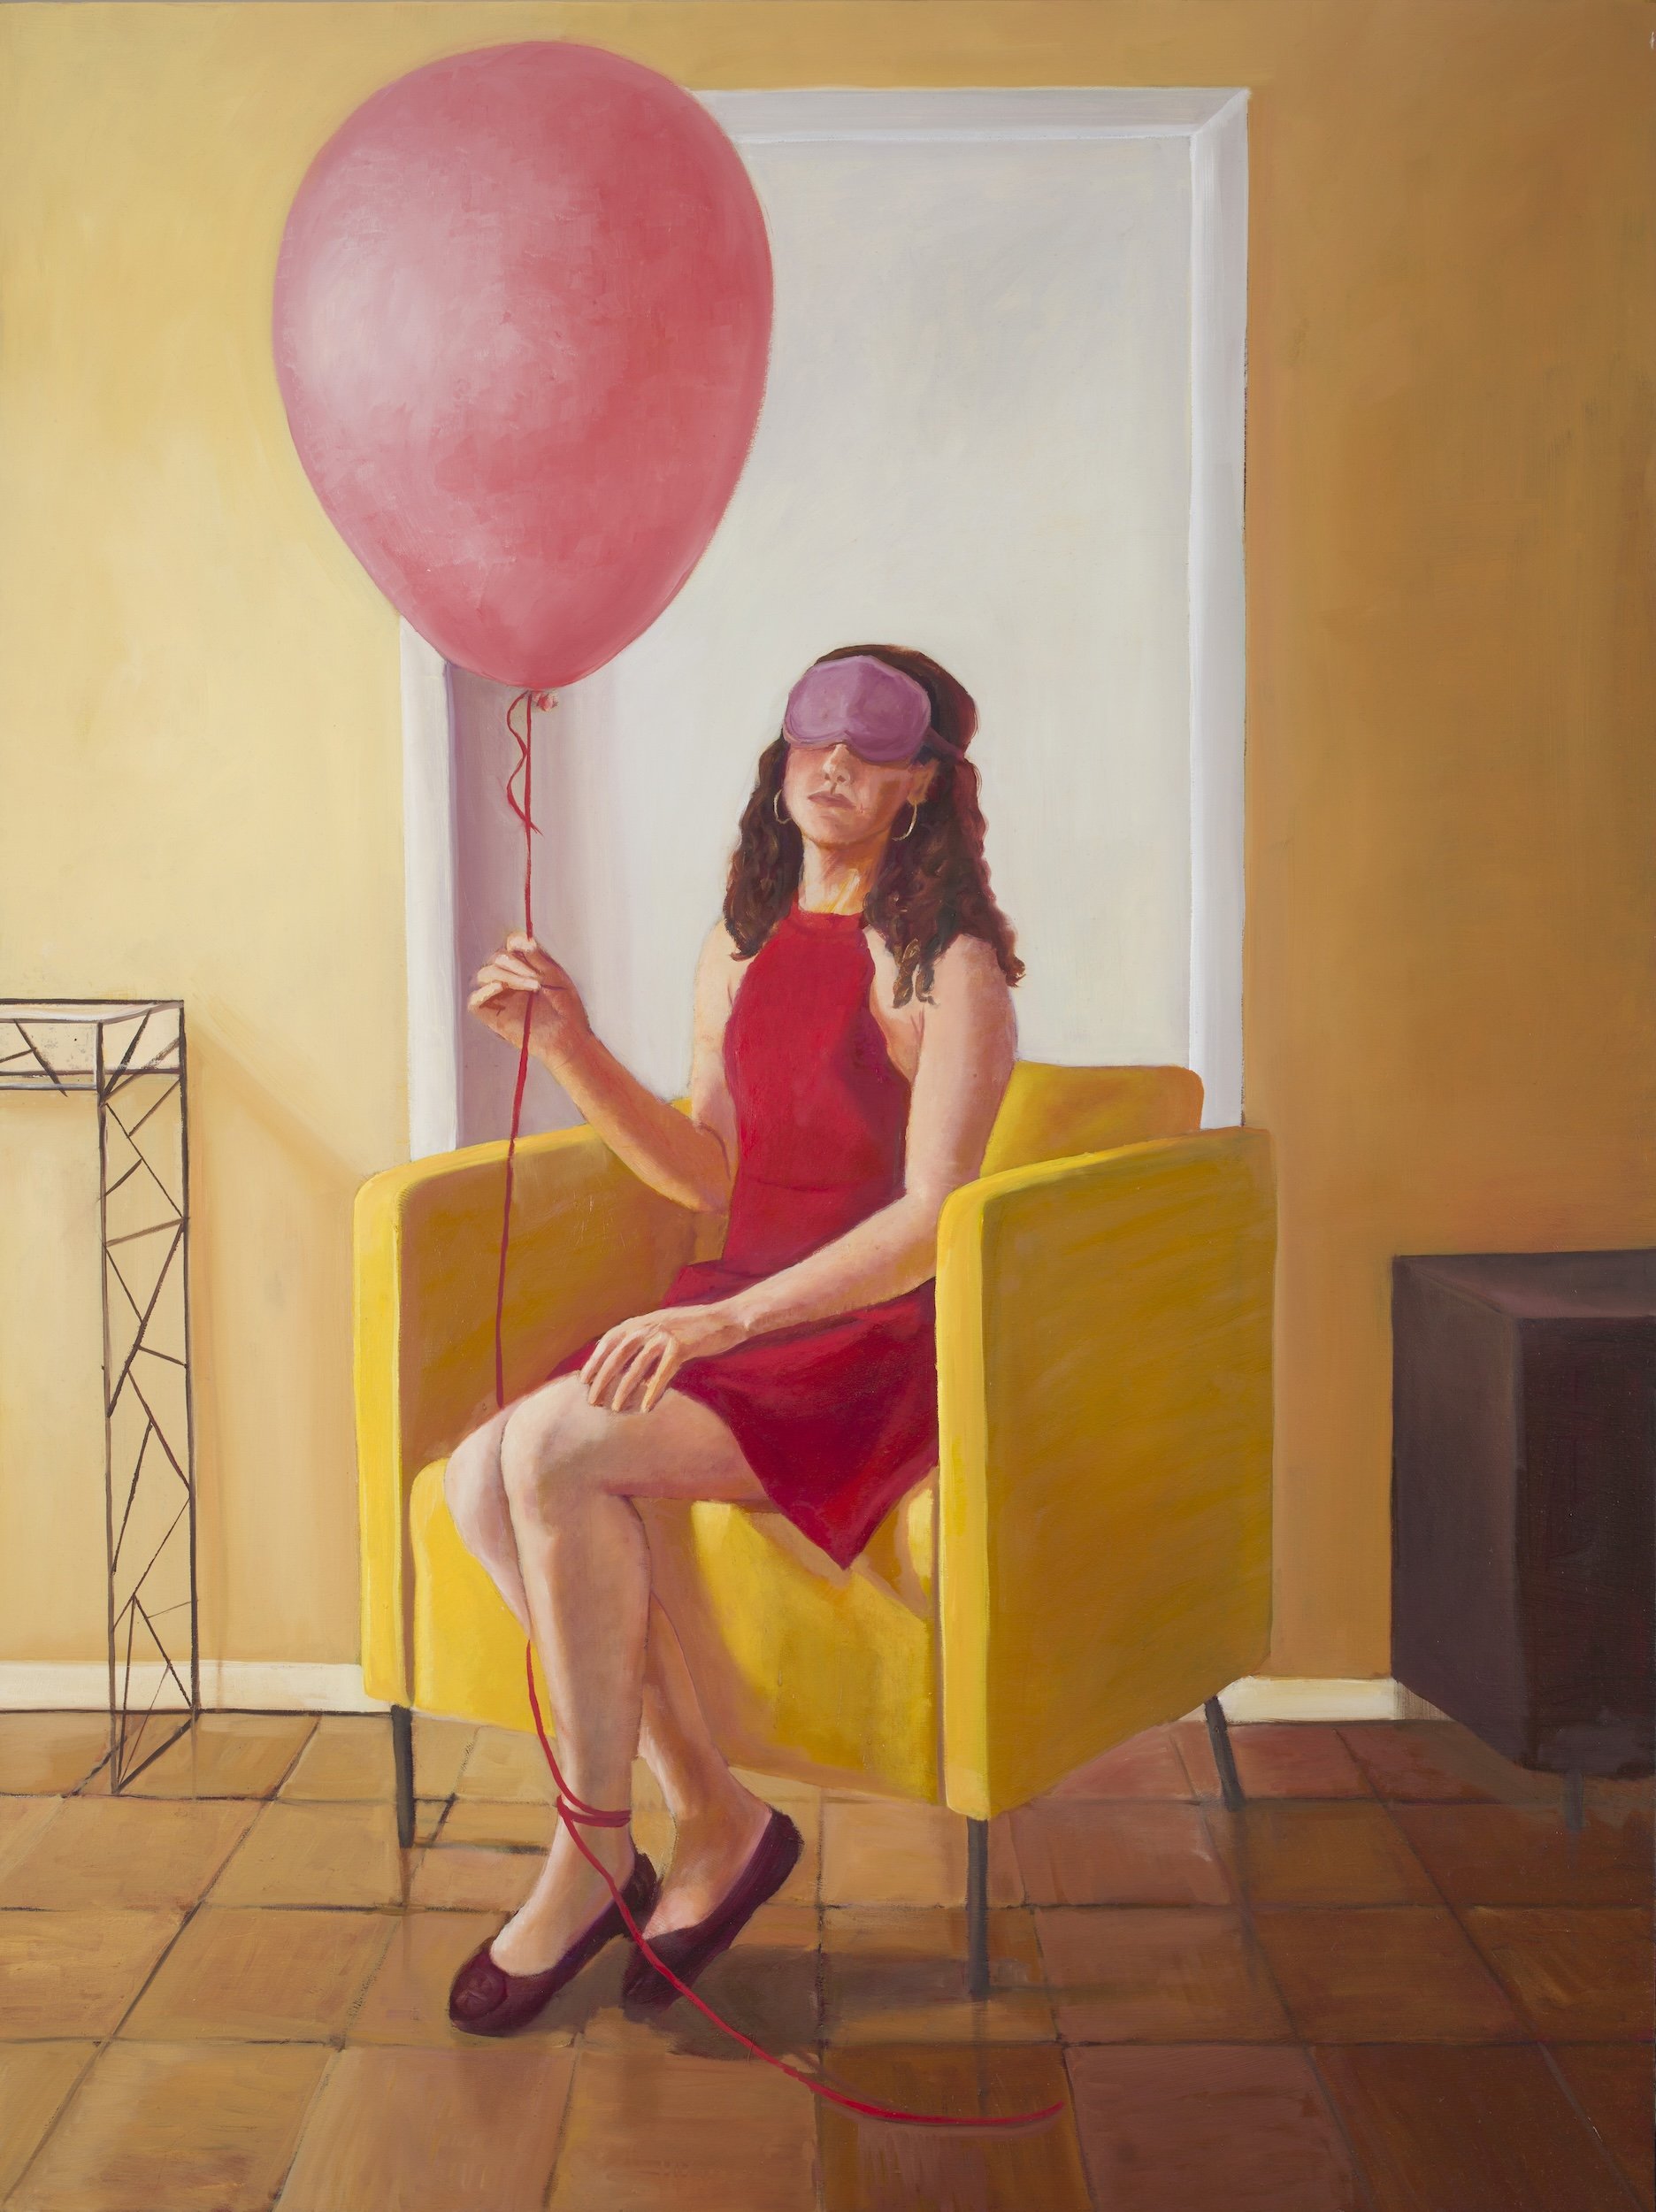 All in a Pink Balloon